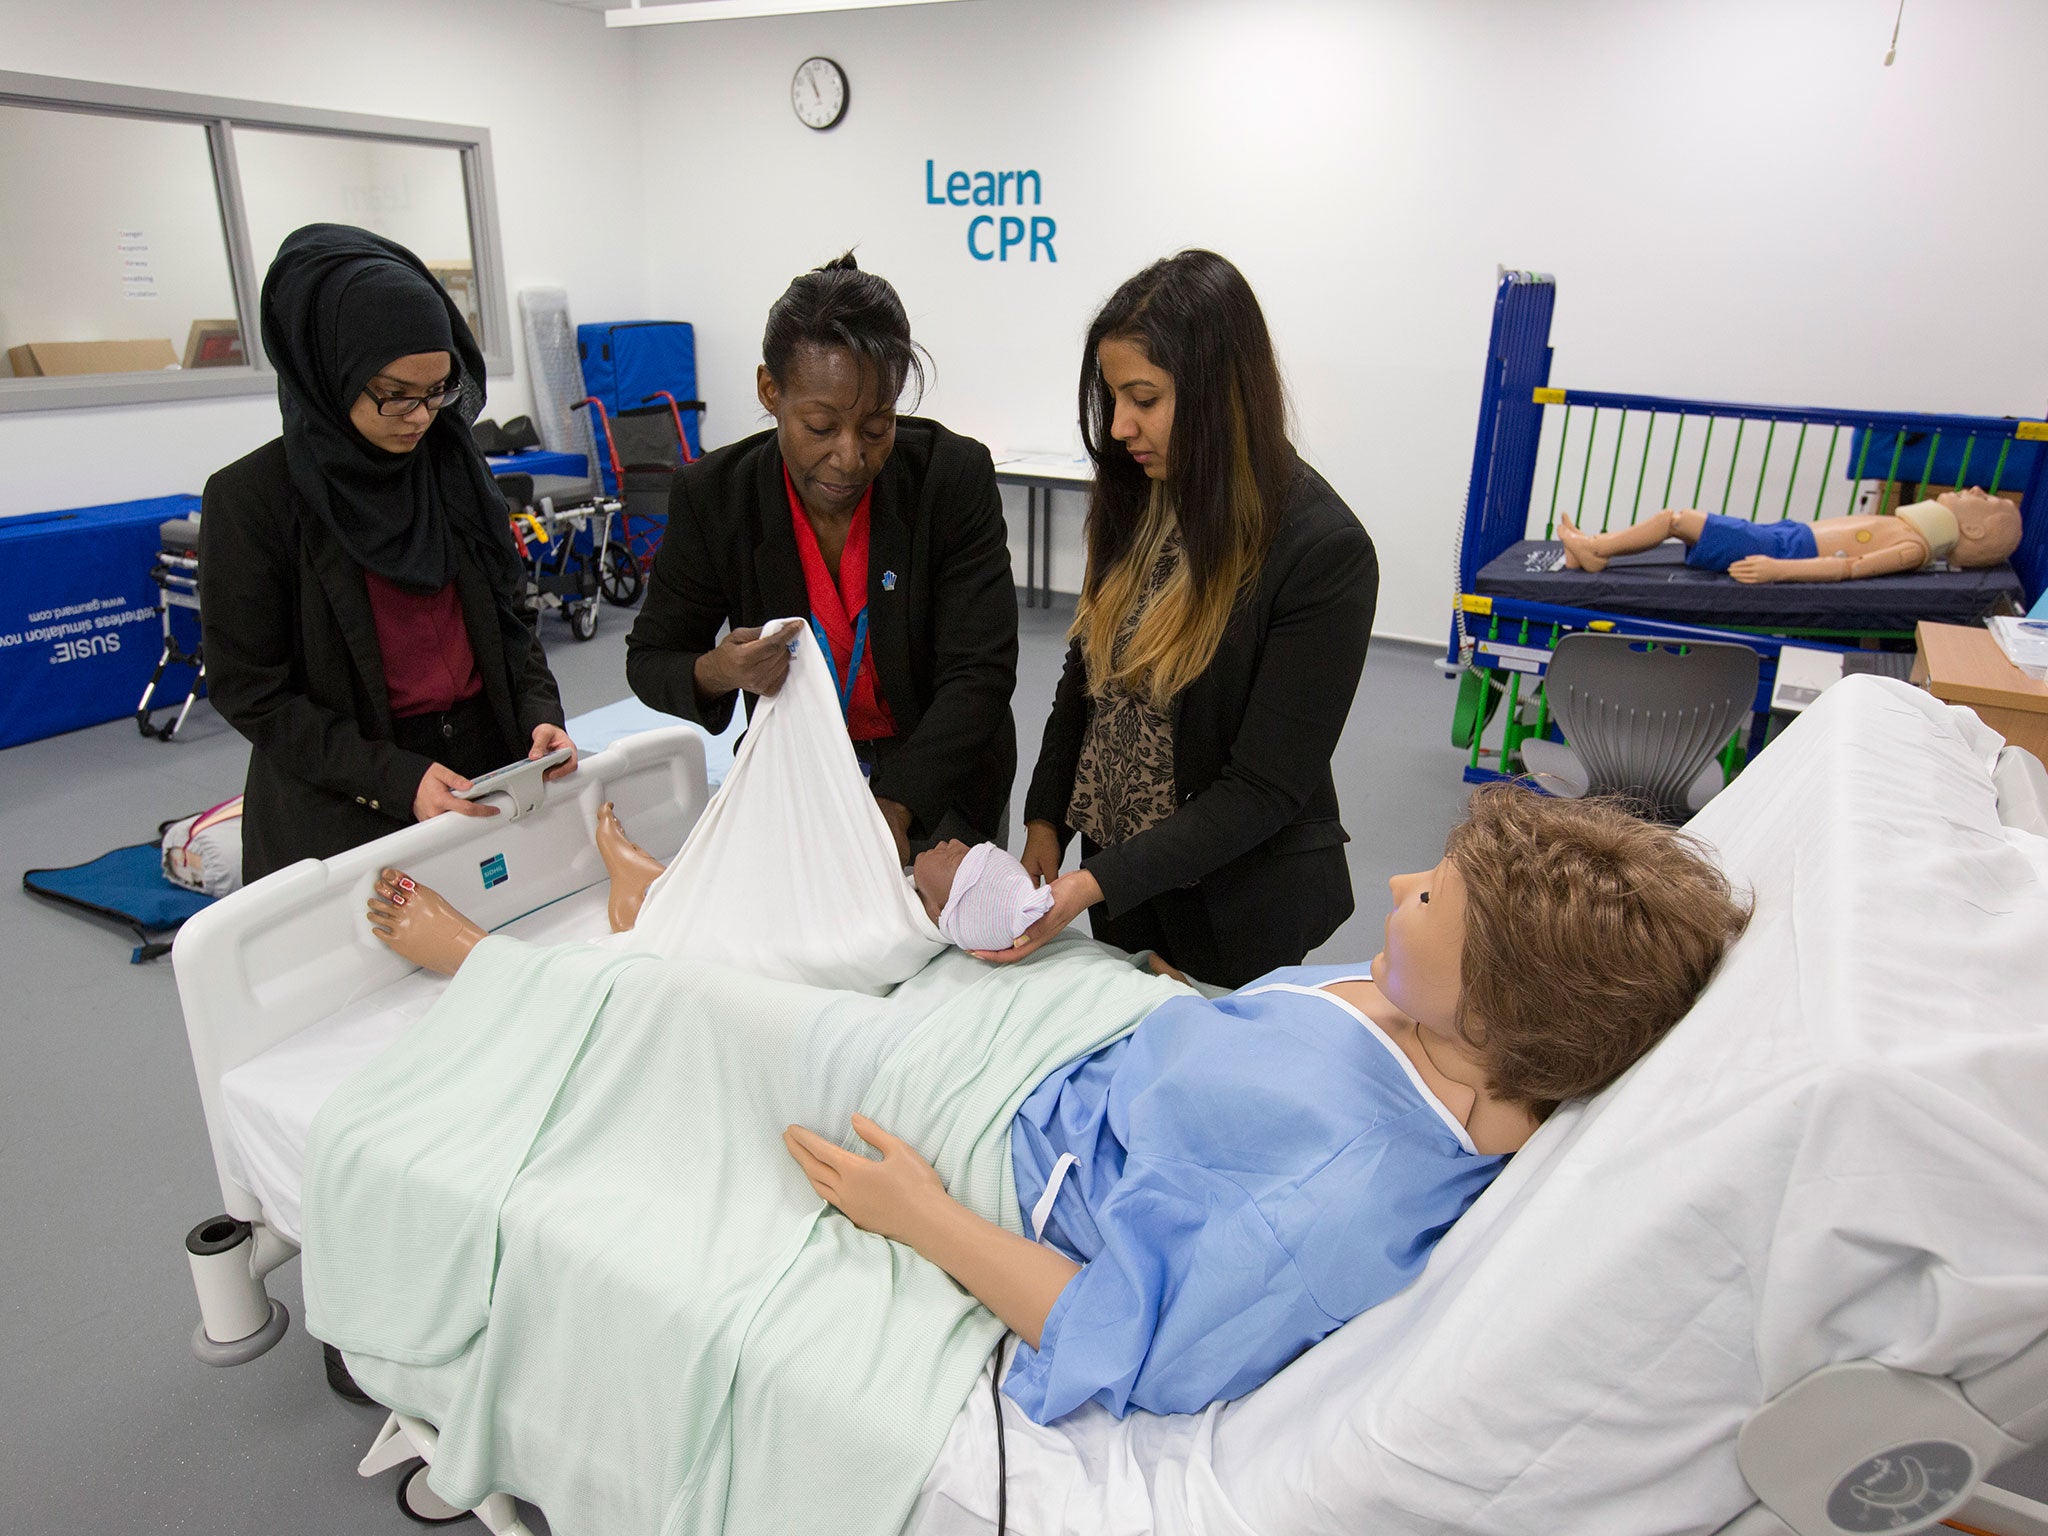 Students learn how to deal with patients on a mock-up of a hospital ward (called a simulation ward) at the Health Futures University Training College in West Bromwich